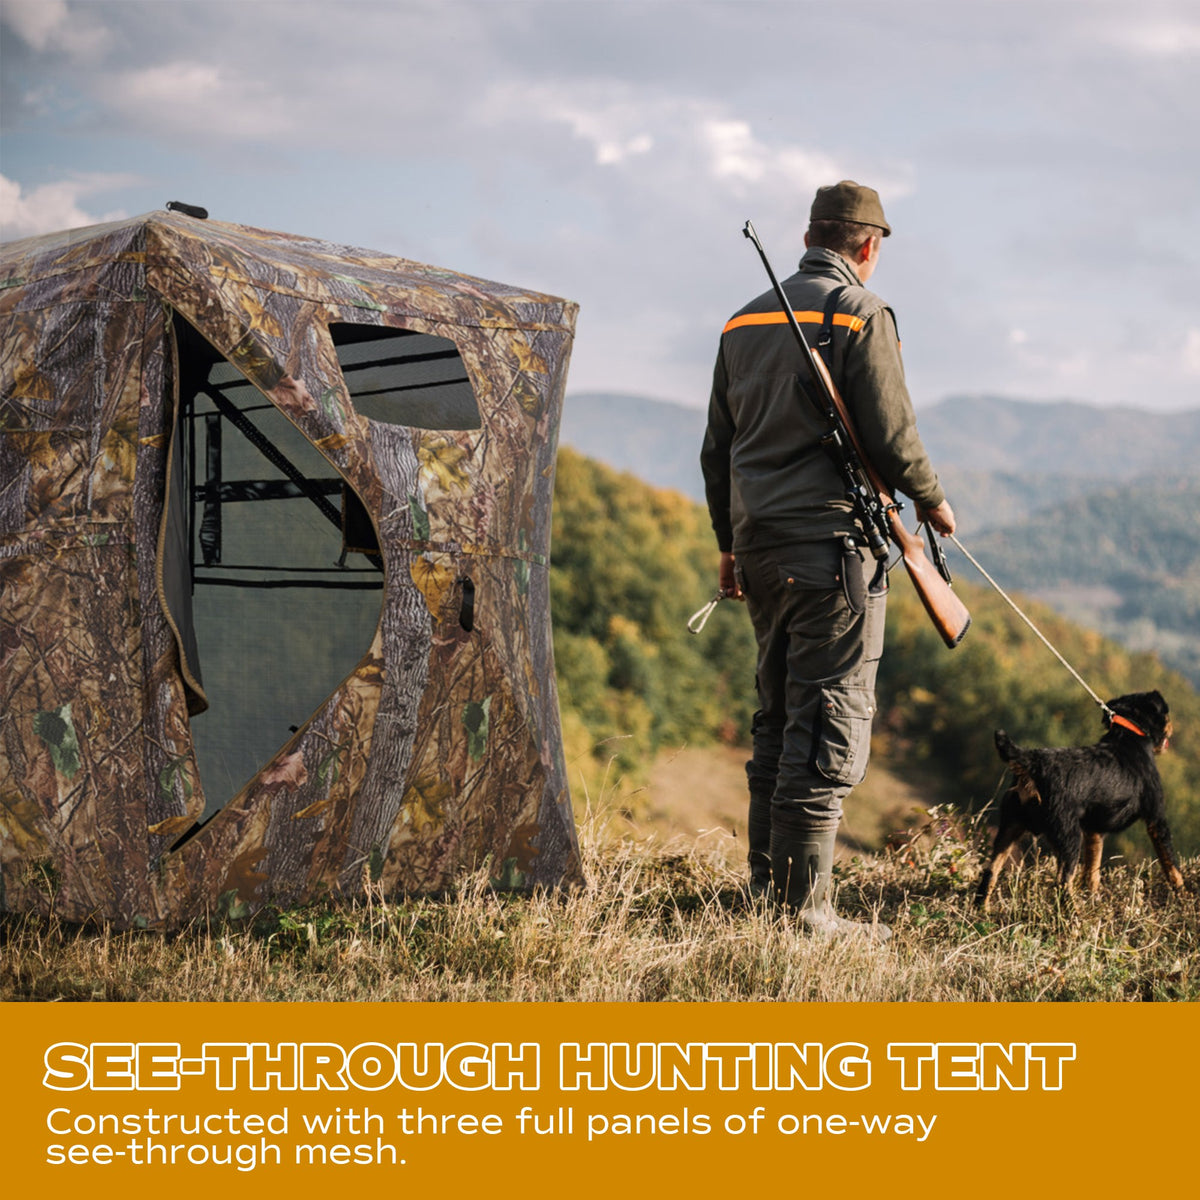 RPNB HGB-1 Hunting Blind One-Way 270 Degree See Through 2-3 Person Portable Pop-Up Setup with Hunter and Dog In Woods